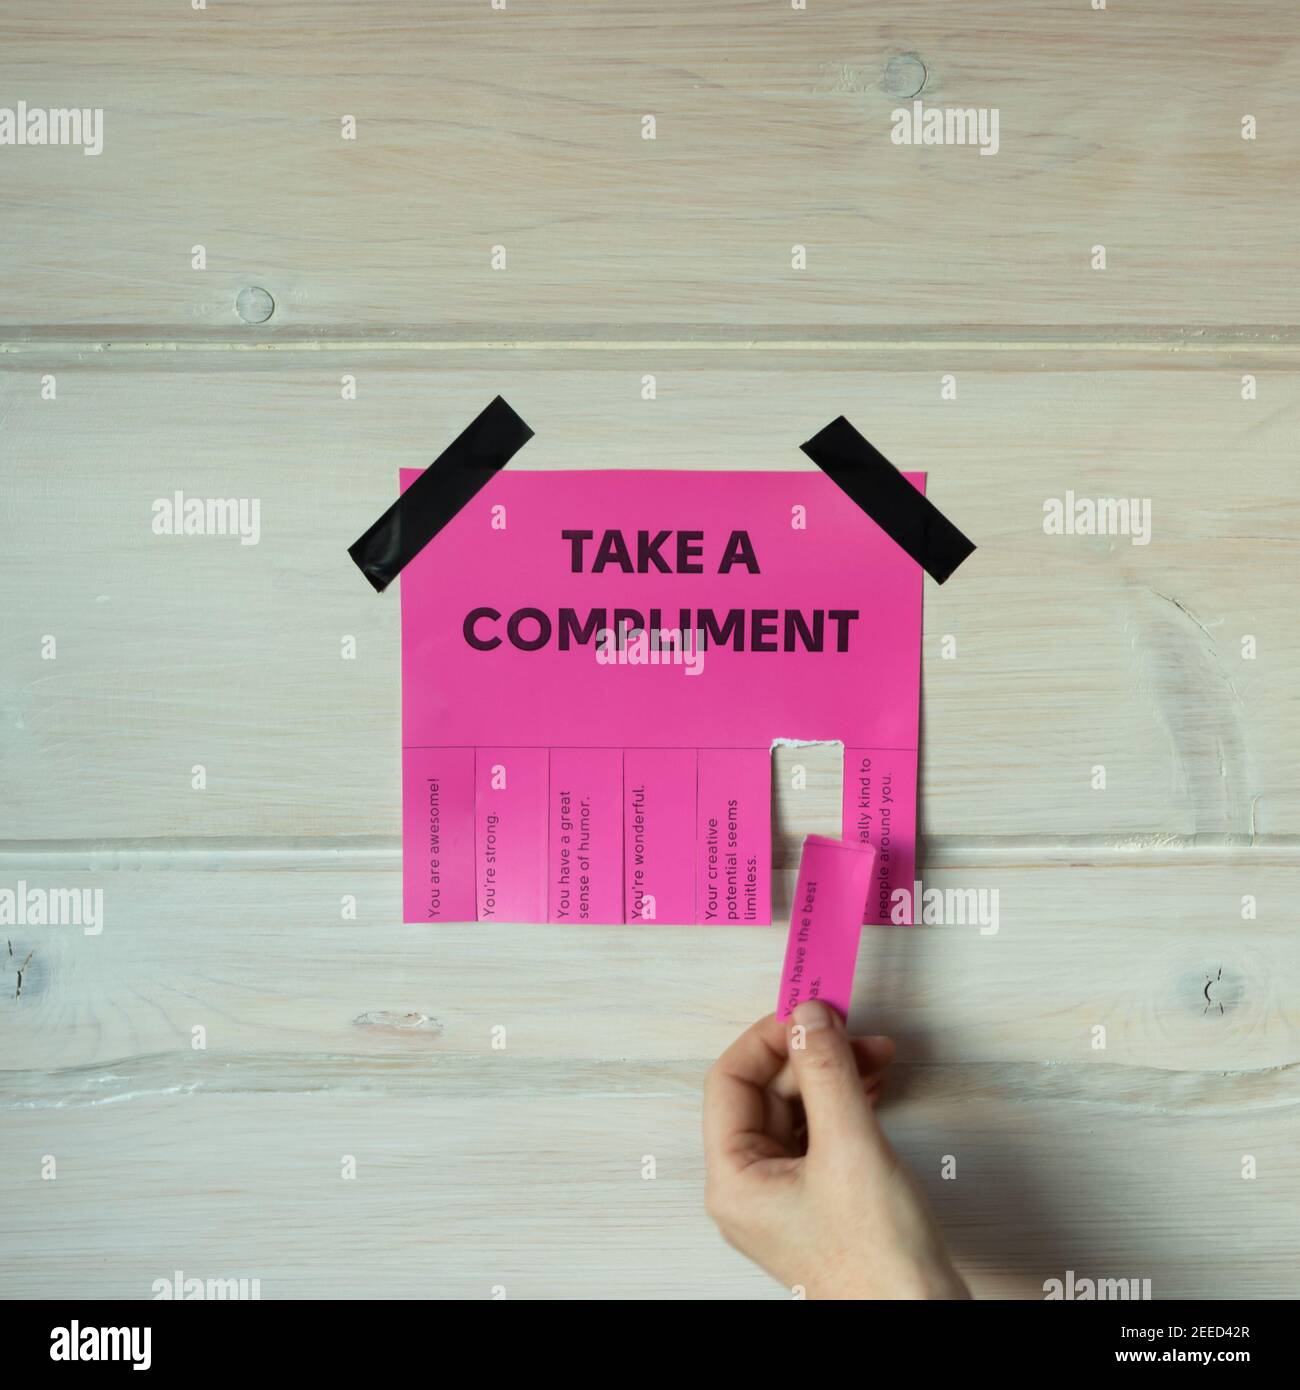 Happy World Compliment Day. Take a compliment. Pink wall paper sticker with text of popular compliments for beautiful lady pasted on wooden background Stock Photo